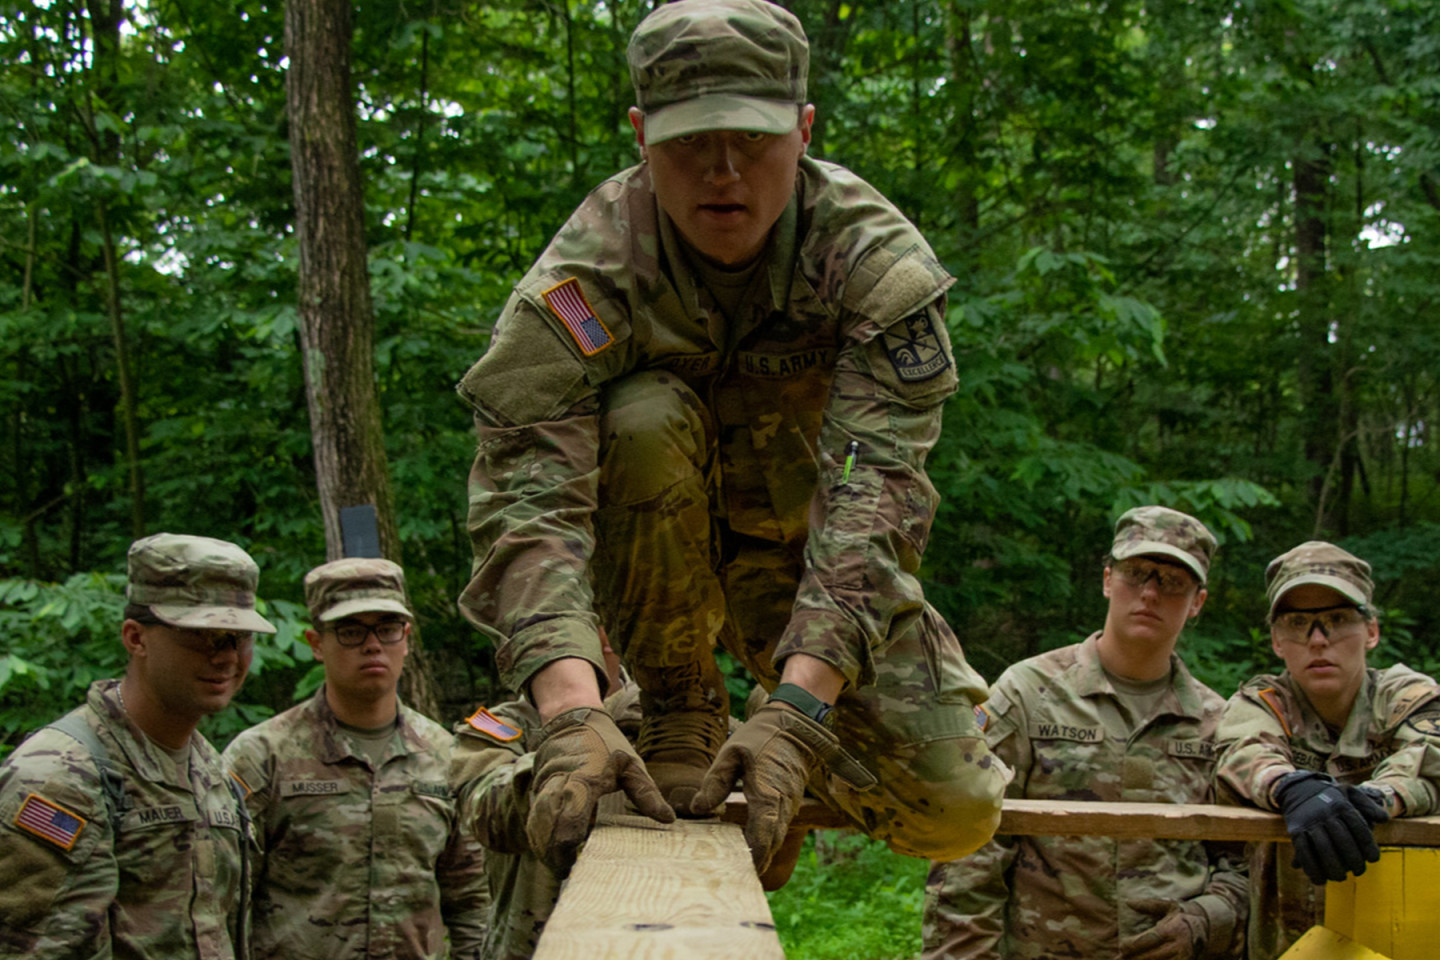 Cadet Cyle Dyer negotiating a balance beam during the obstacle course